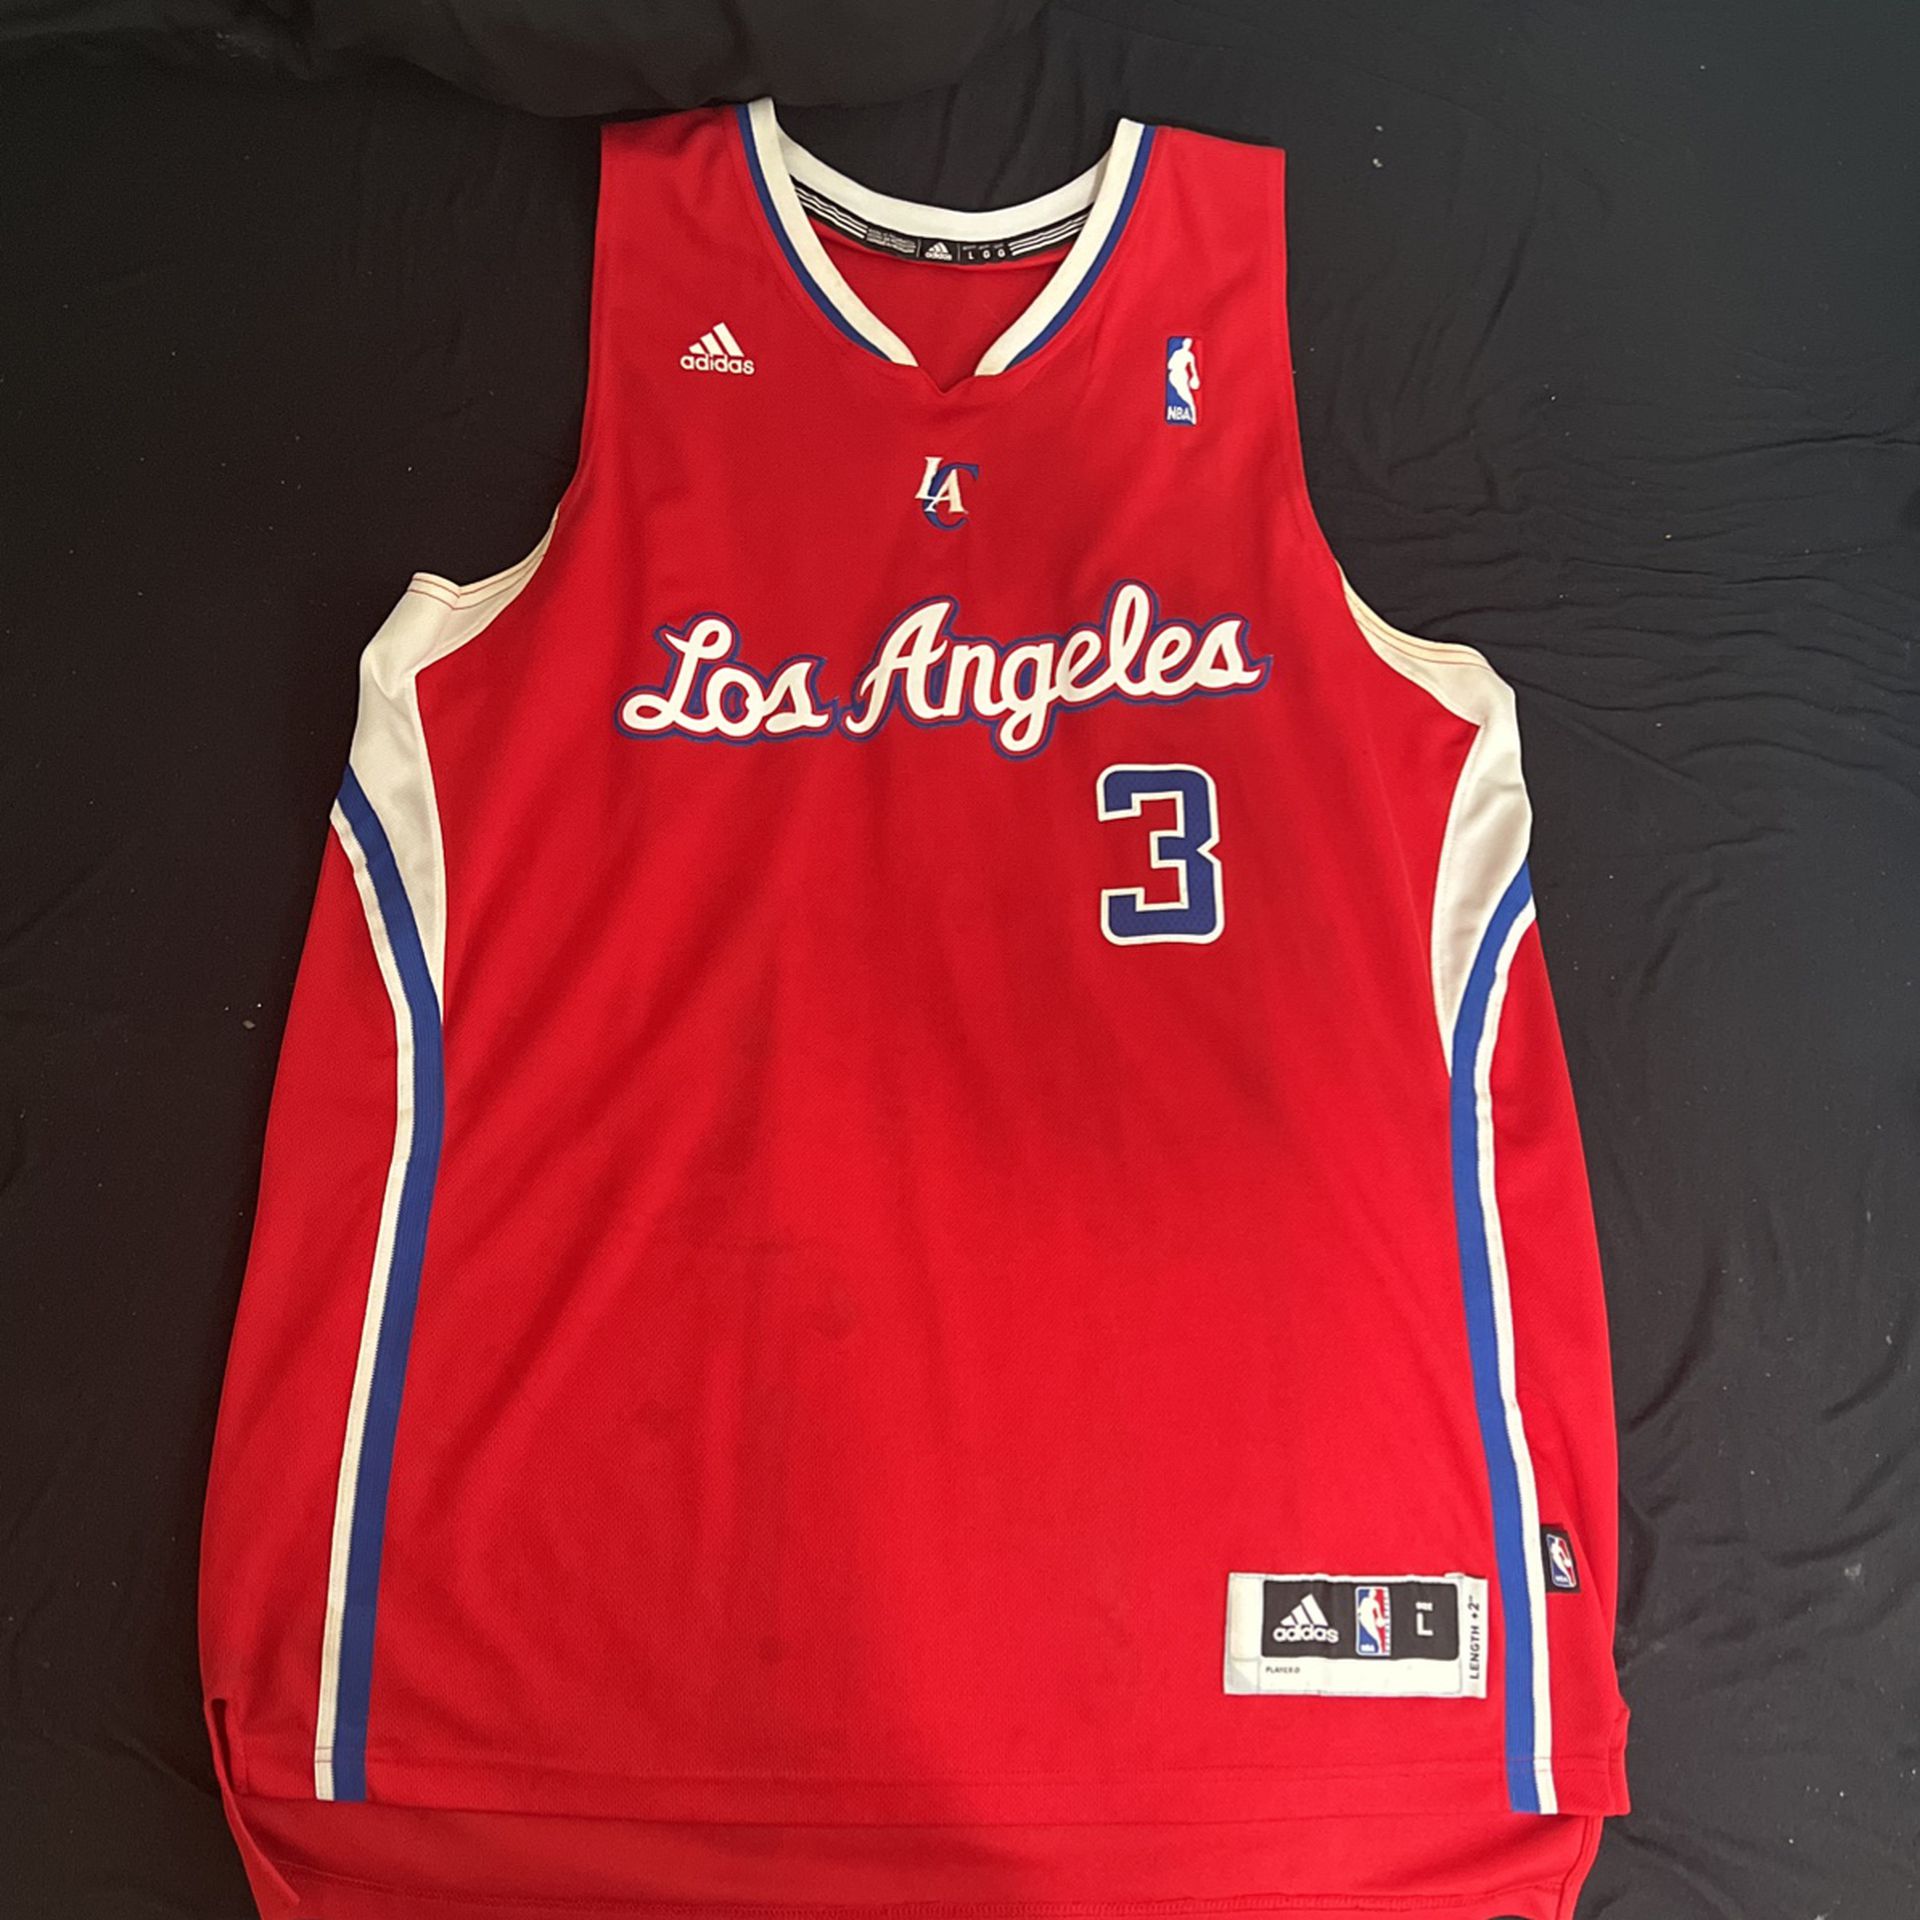 Los Angeles Clippers Jersey Size L